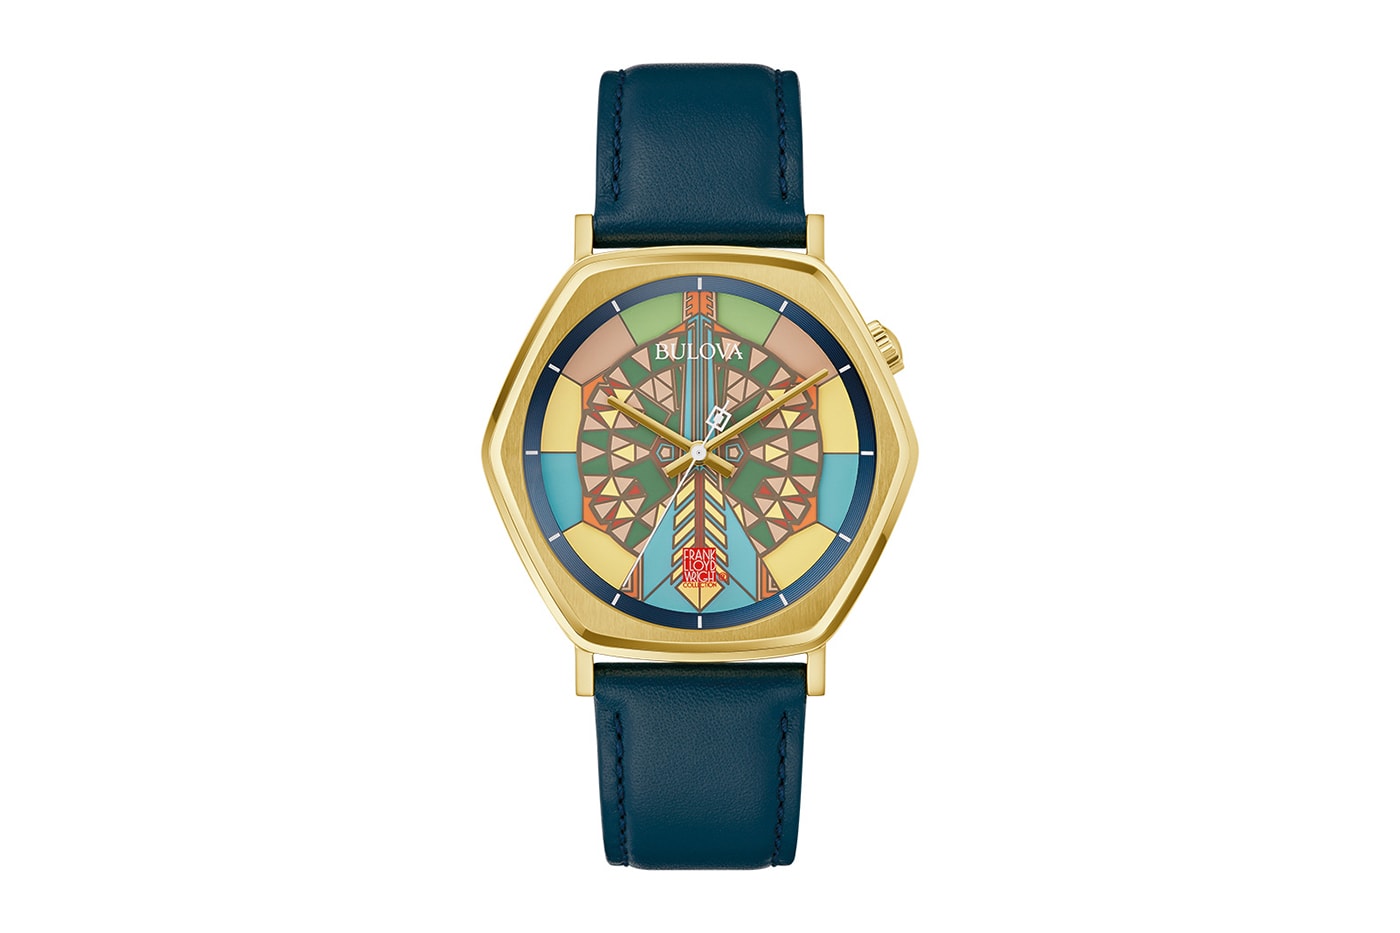 Bulova Frank Lloyd Wright Tokyo Imperial Hotel Inspired Limited-Edition Timepiece Release Info